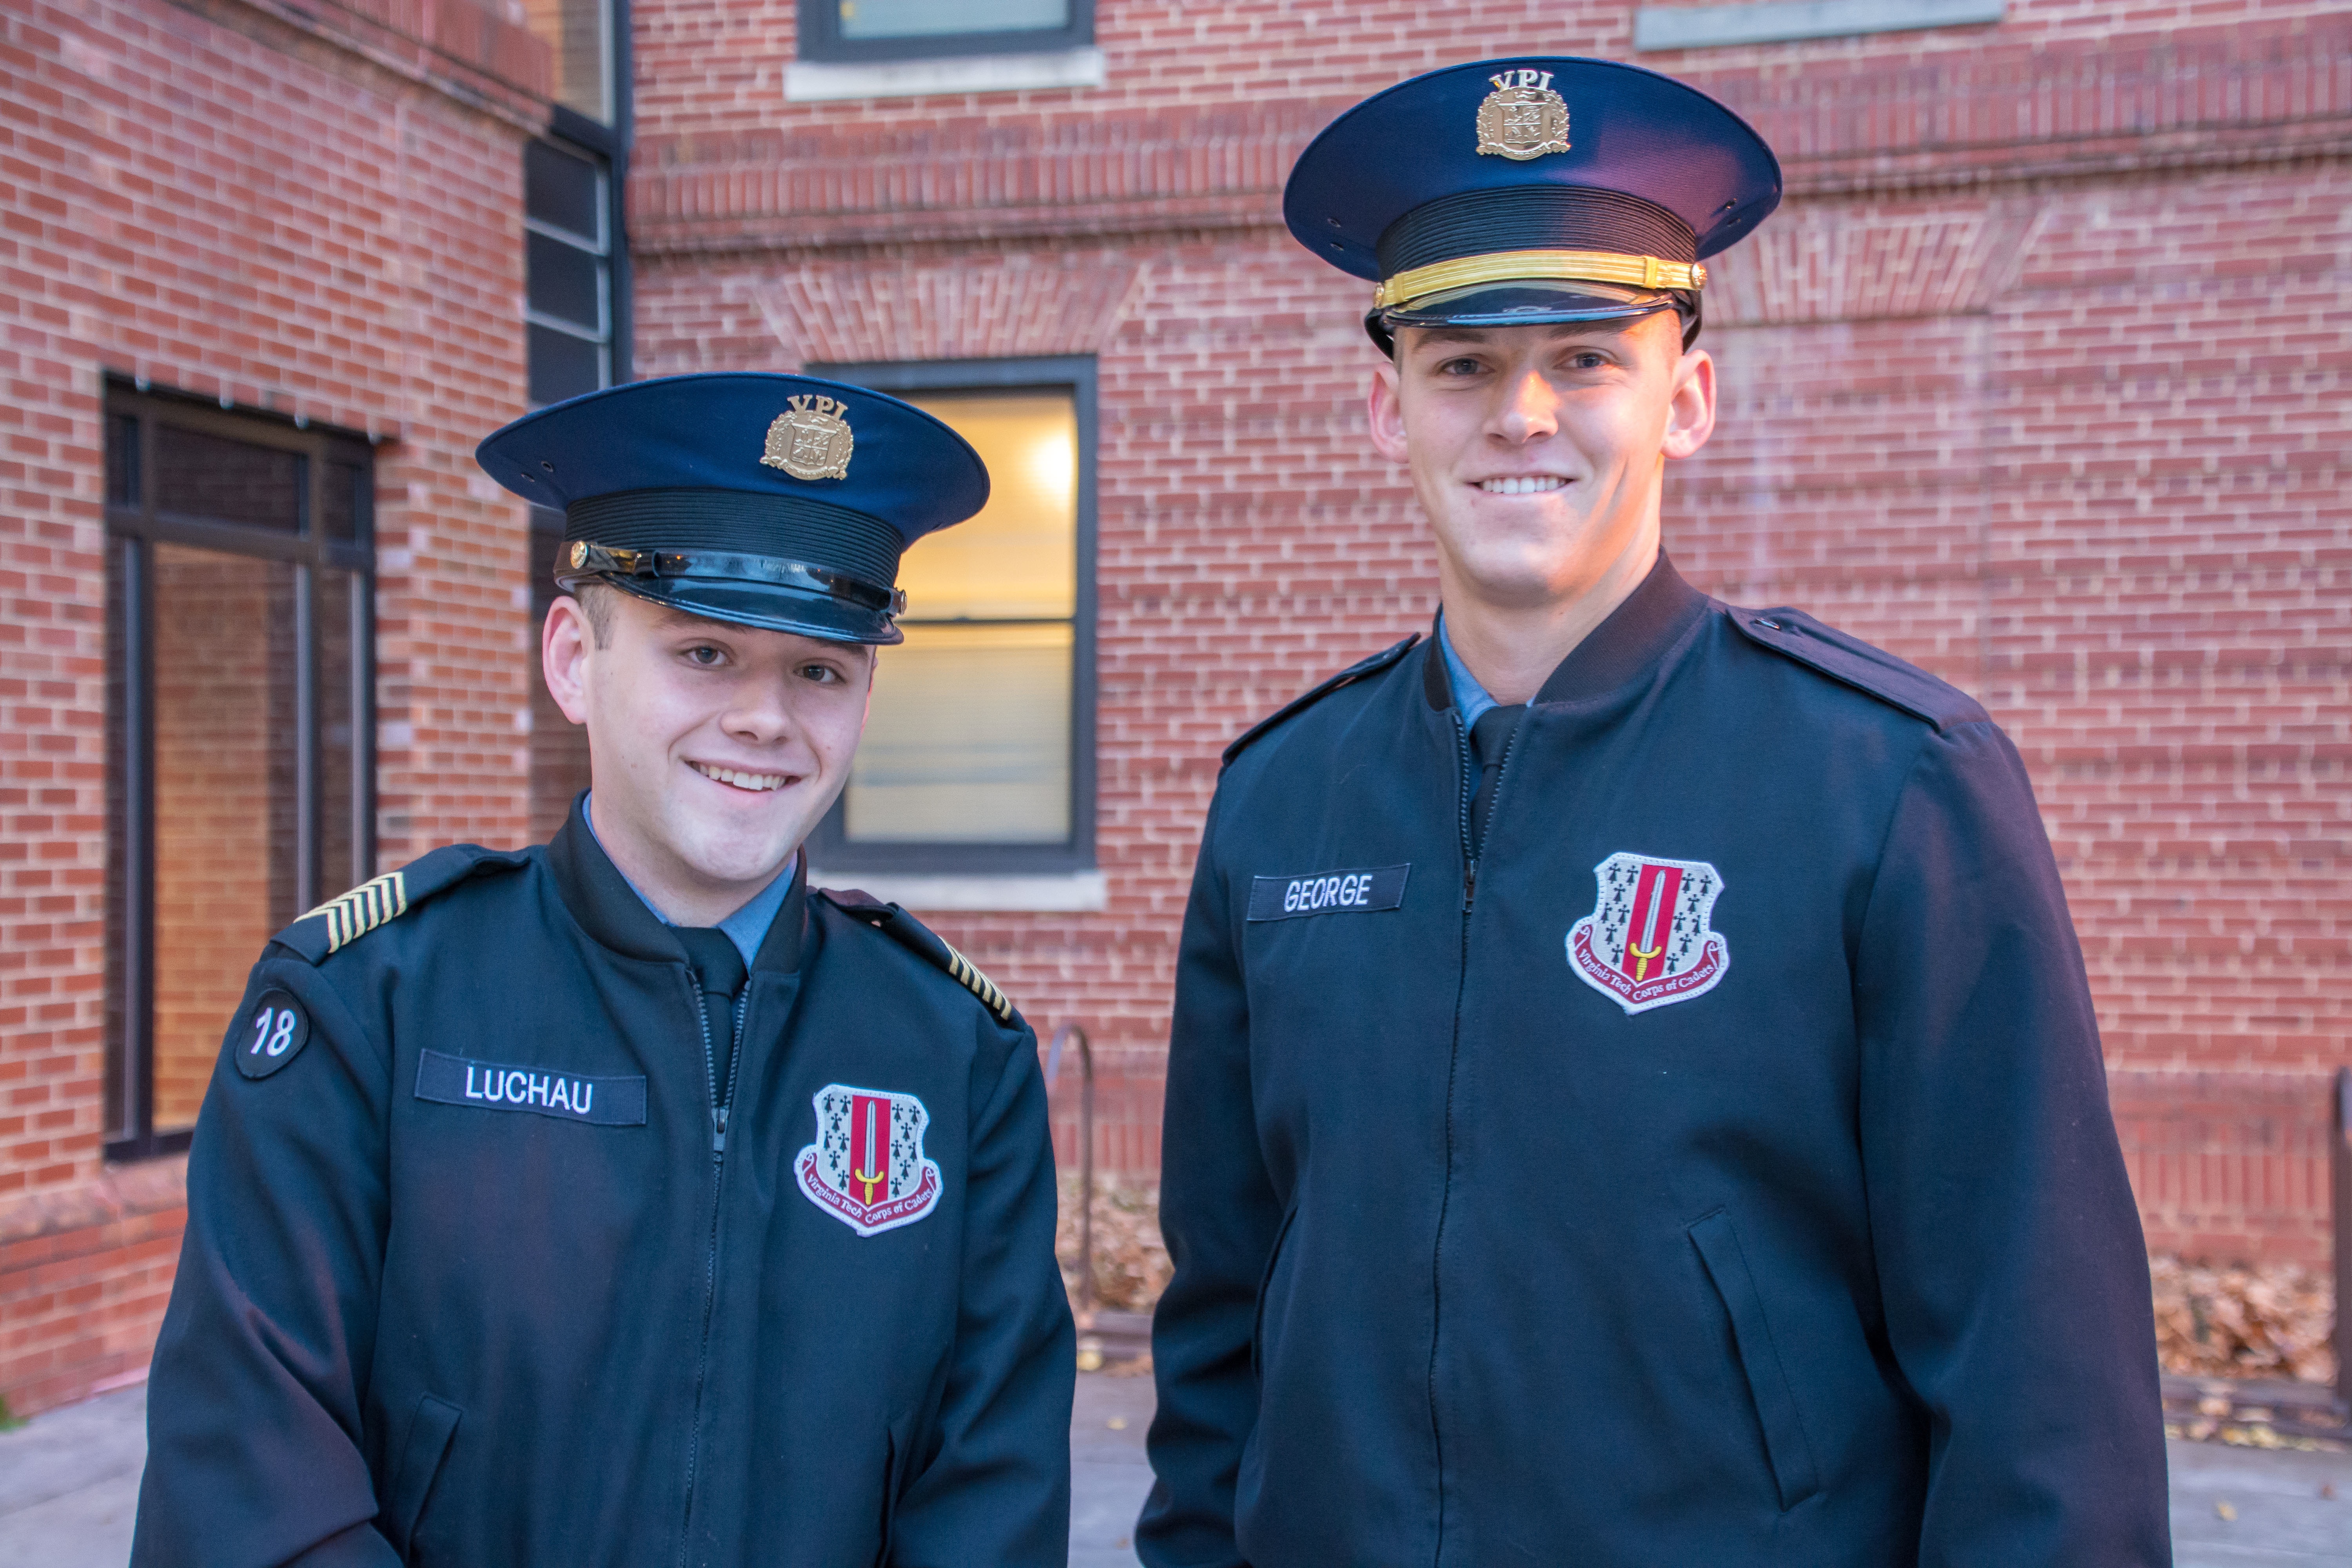 From left to right are Cadet Donald Luchau and Cadet Andrew George on teh Upper Quad.